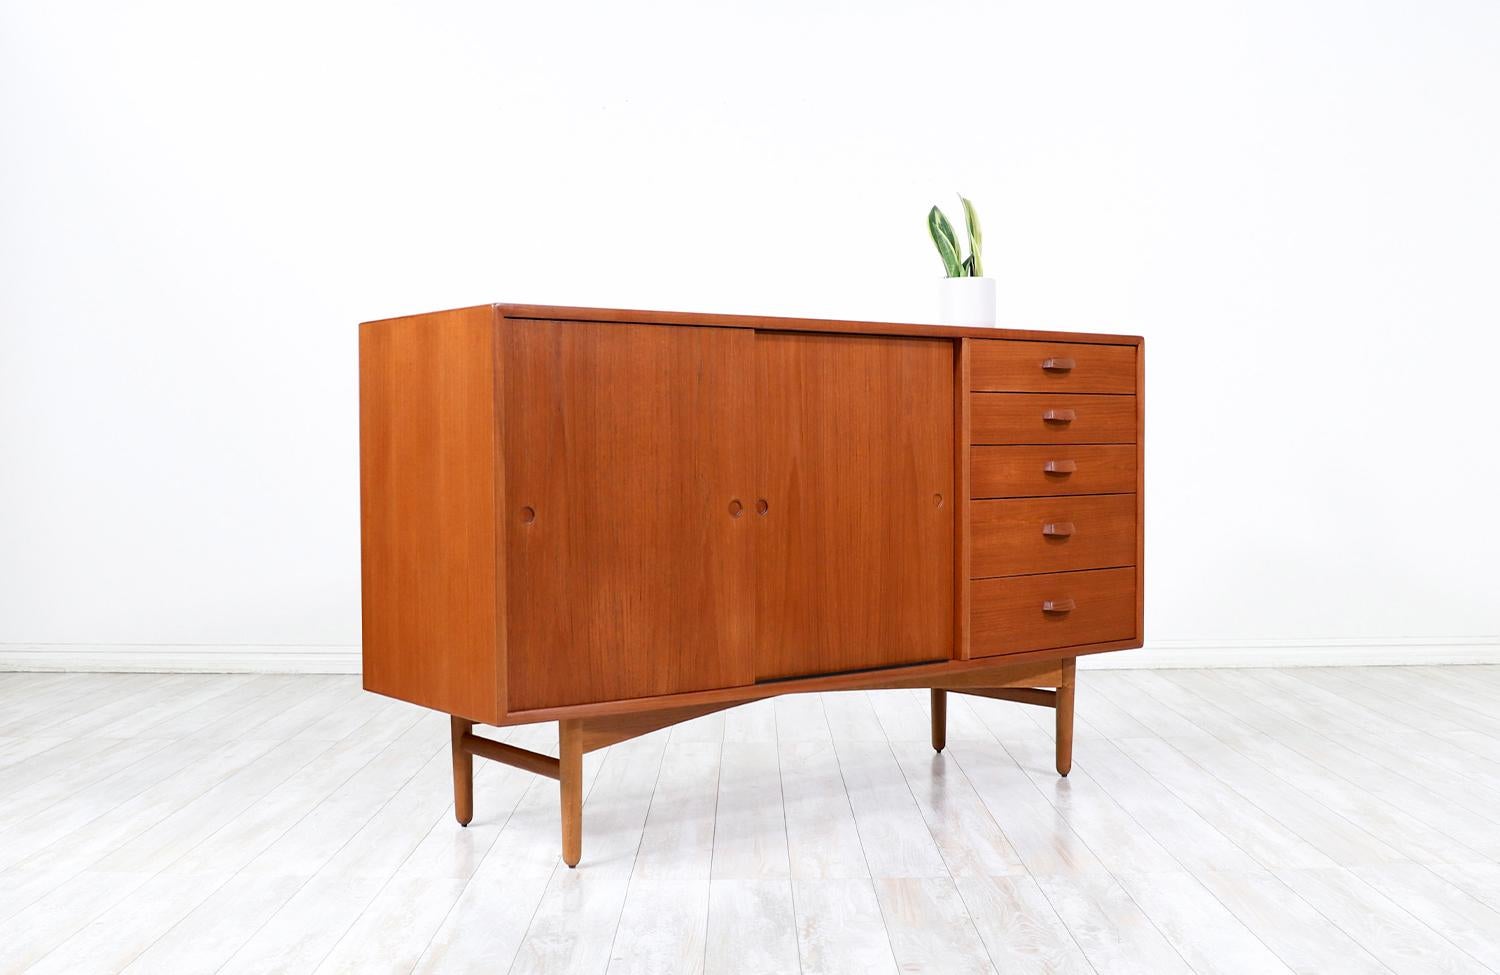 Svend Age Hansen Teak & Oak Credenza with Drawers for Naestved Møbelfabrik In Excellent Condition For Sale In Los Angeles, CA